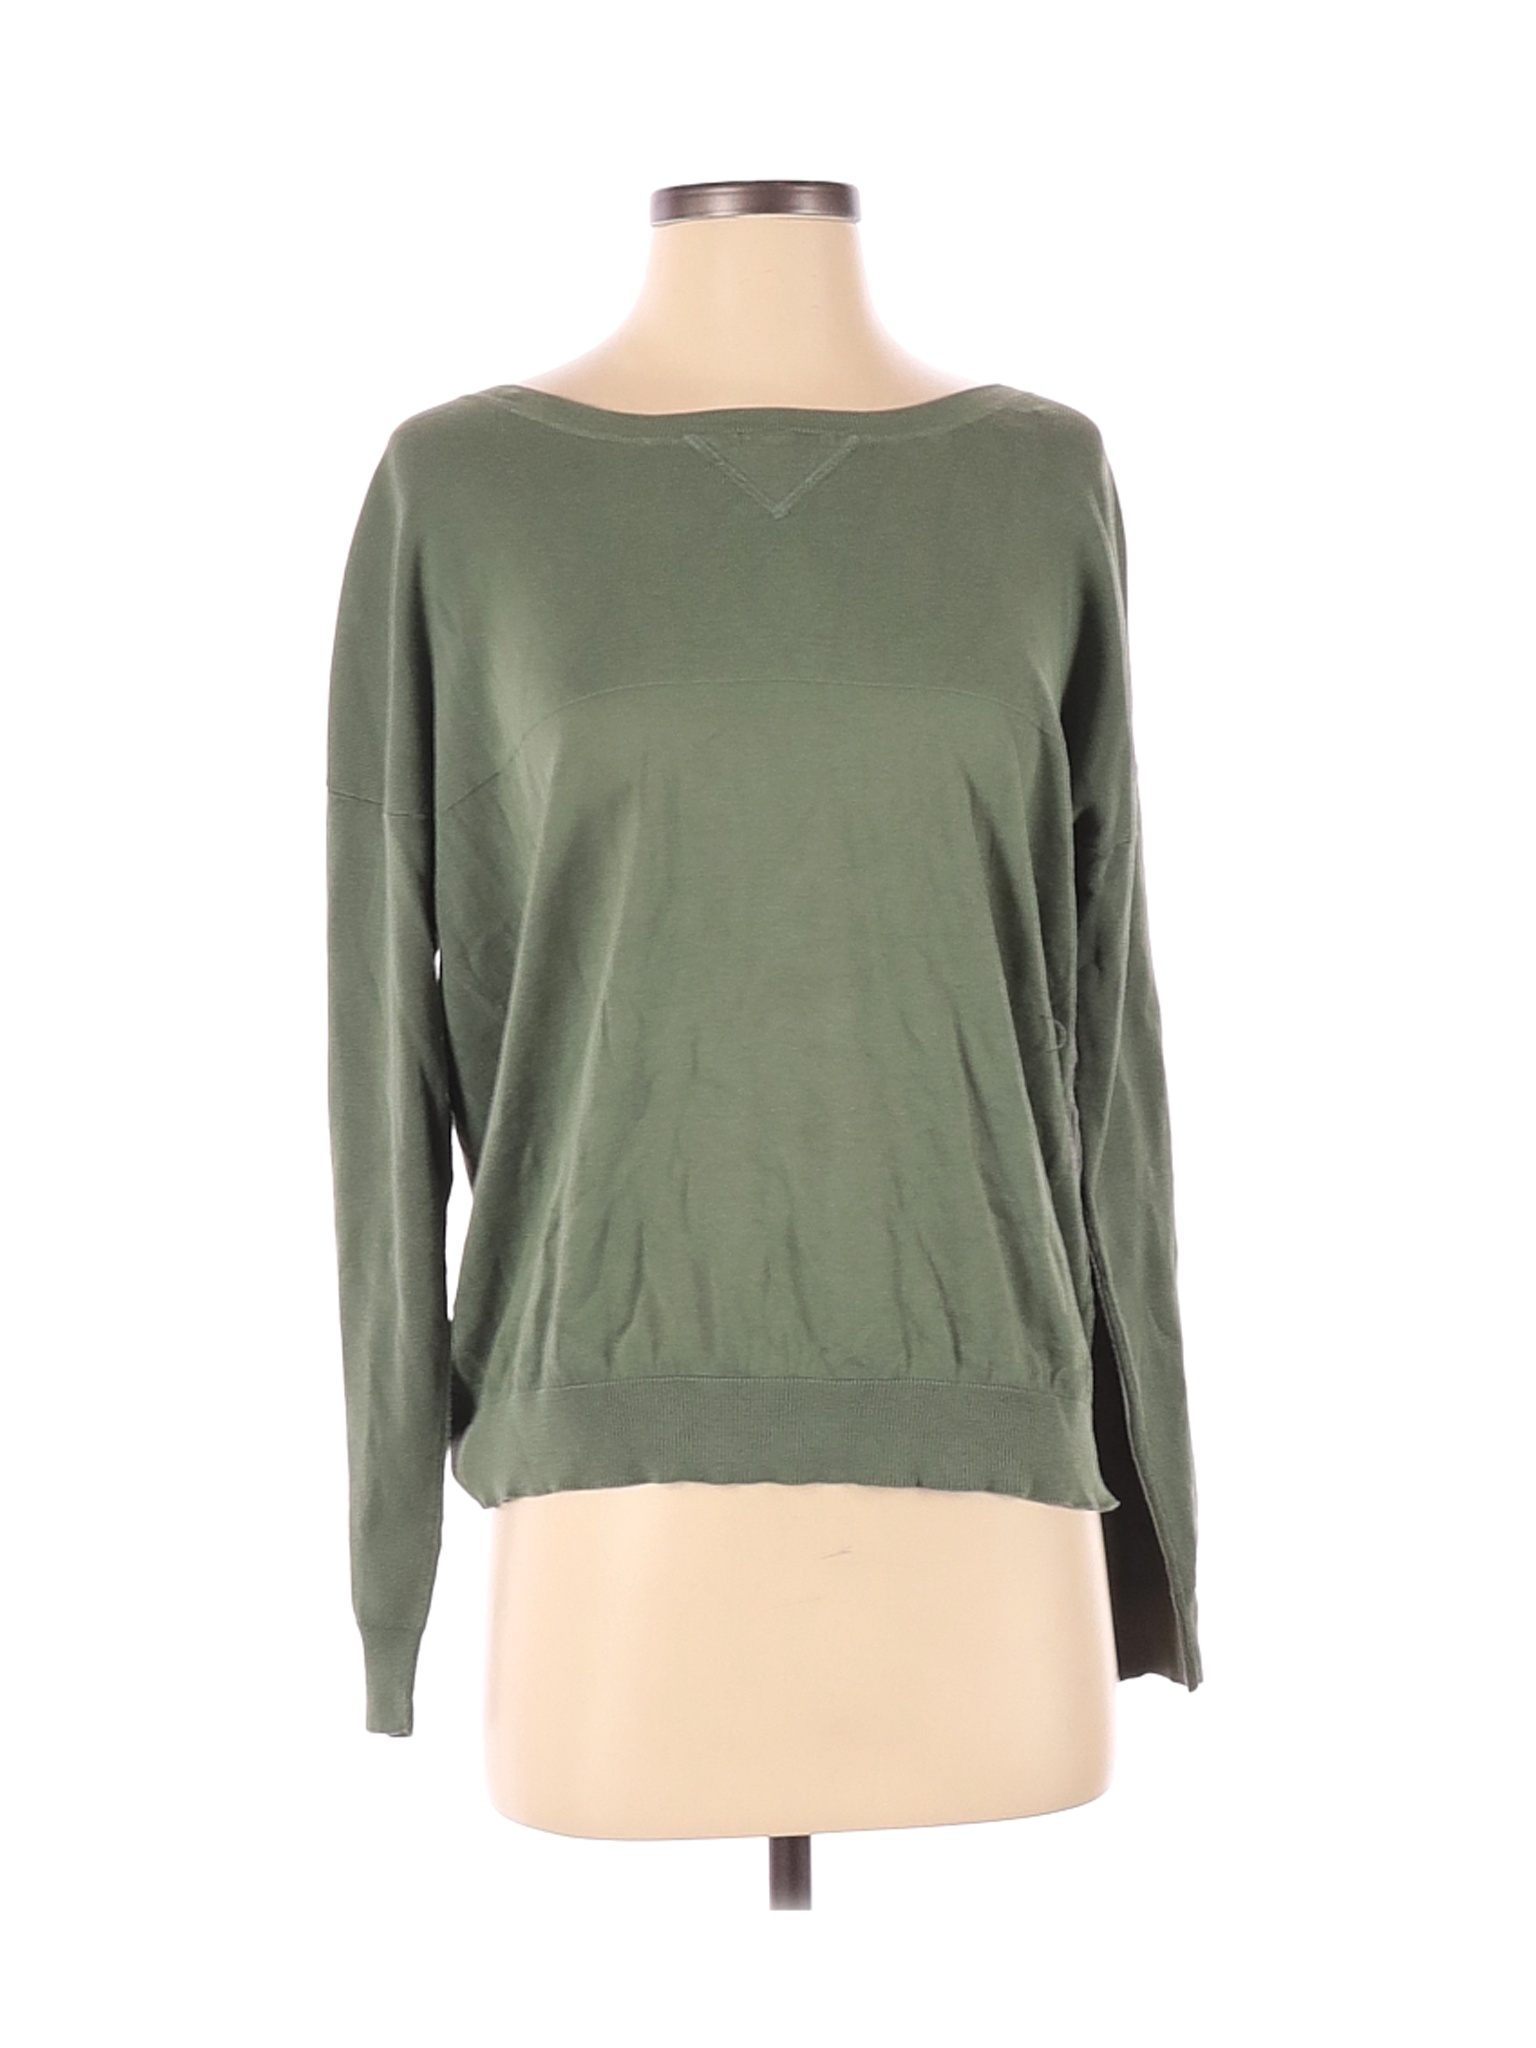 The Territory Ahead Women Green Pullover Sweater S | eBay